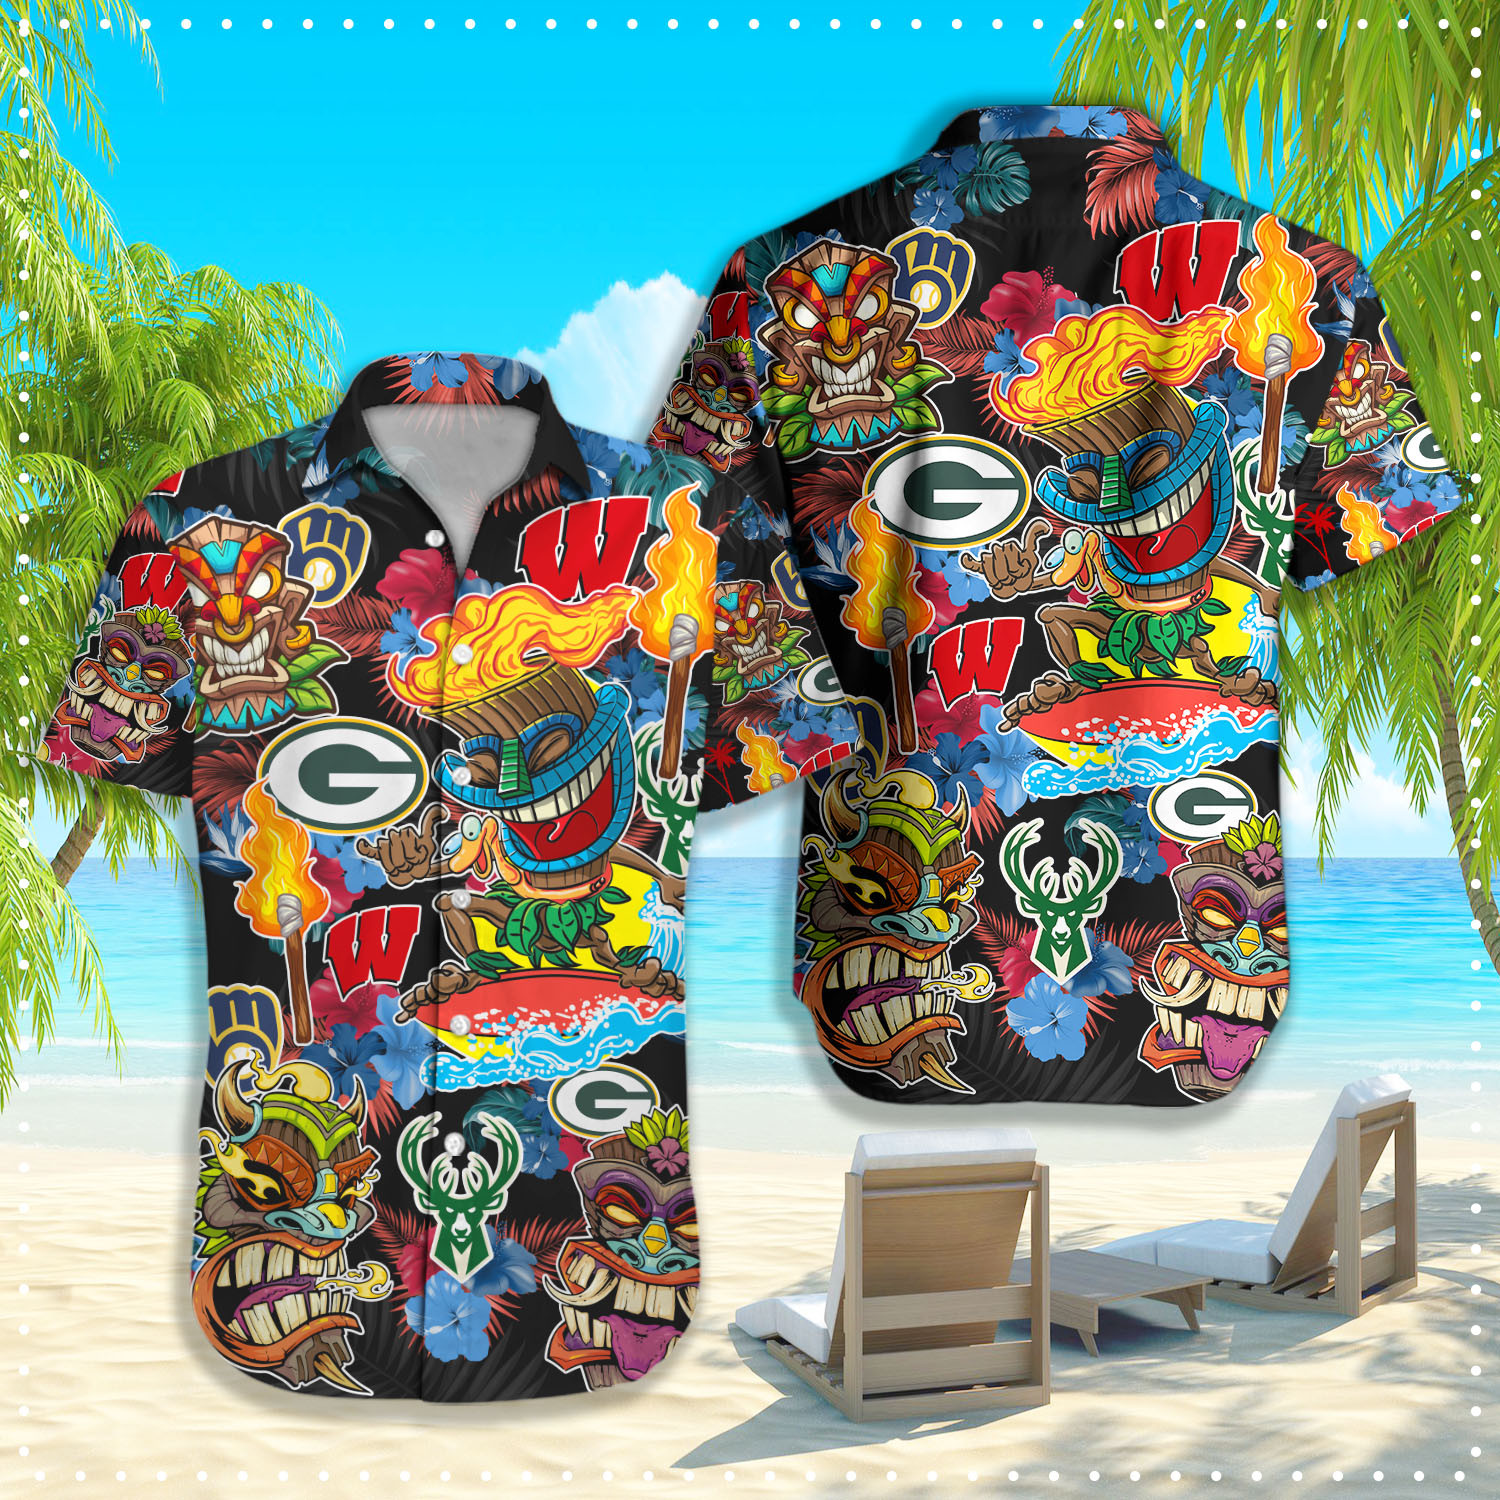 If you're looking for a NHL Hawaiian shirt to wear, don't wait until the last minute! 206